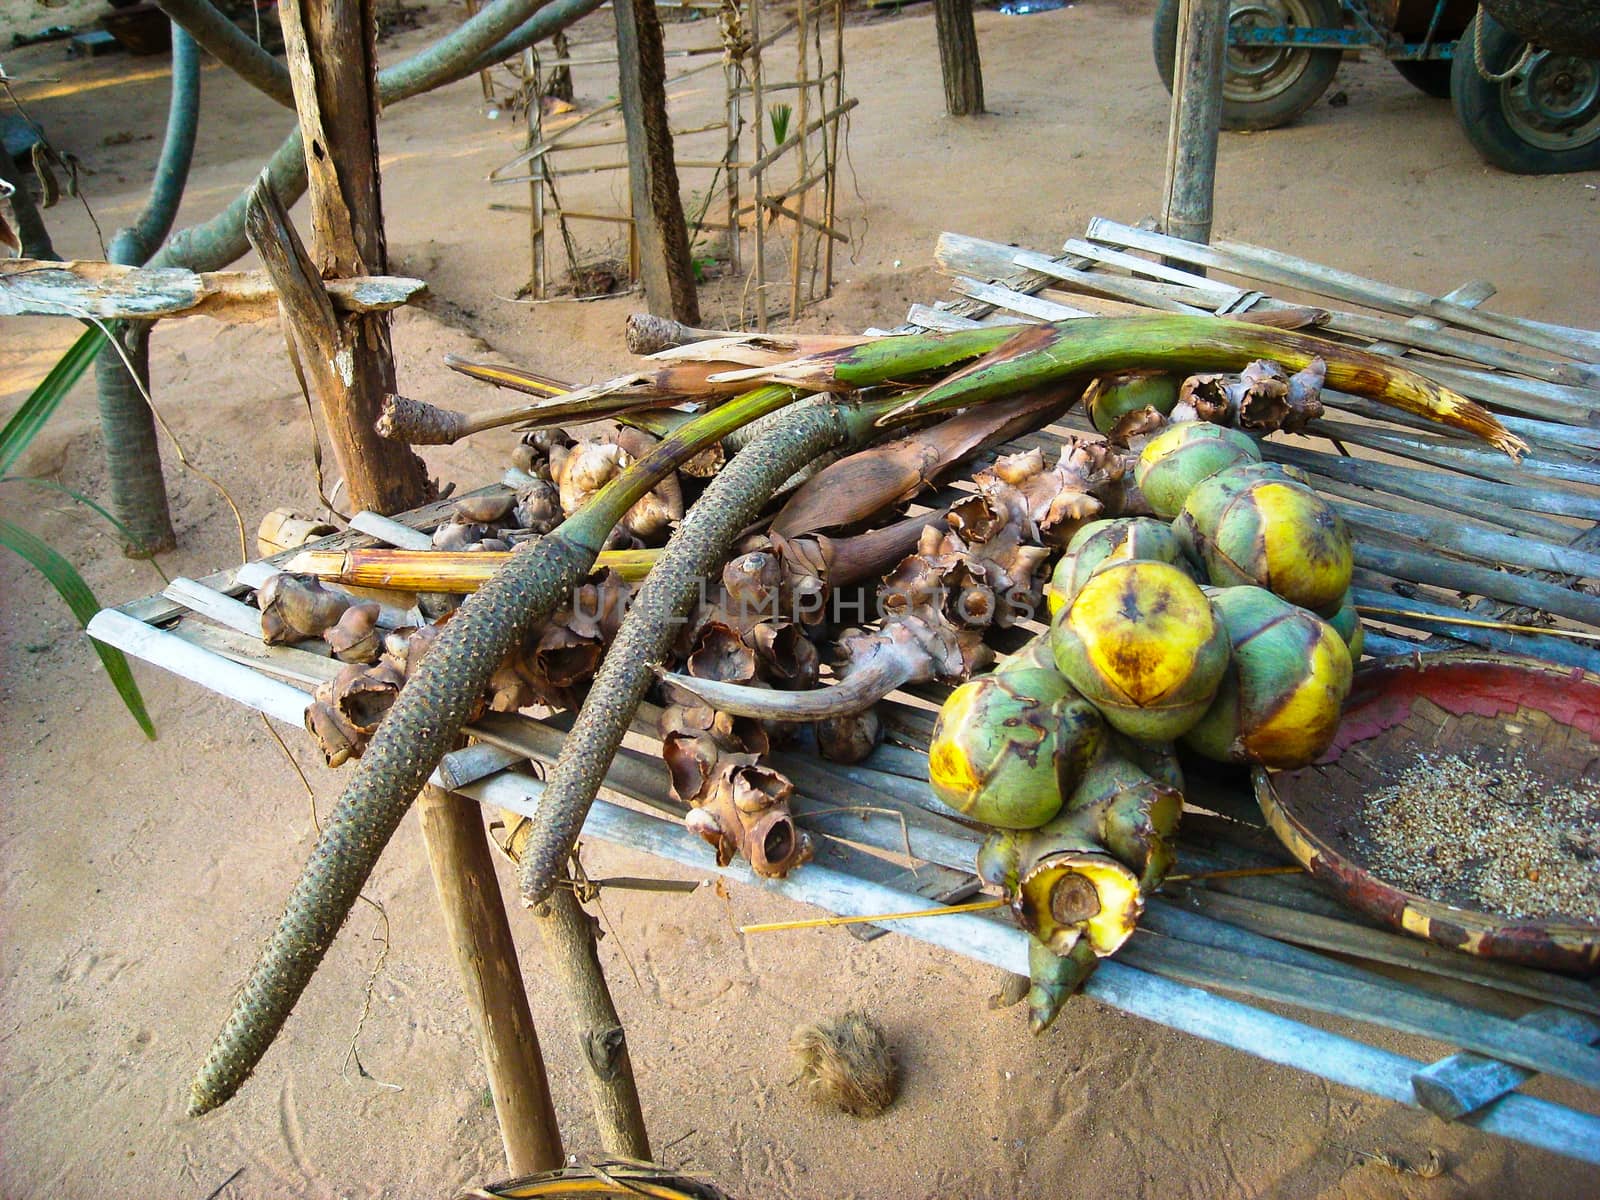 a stand with fruits in a market at burma